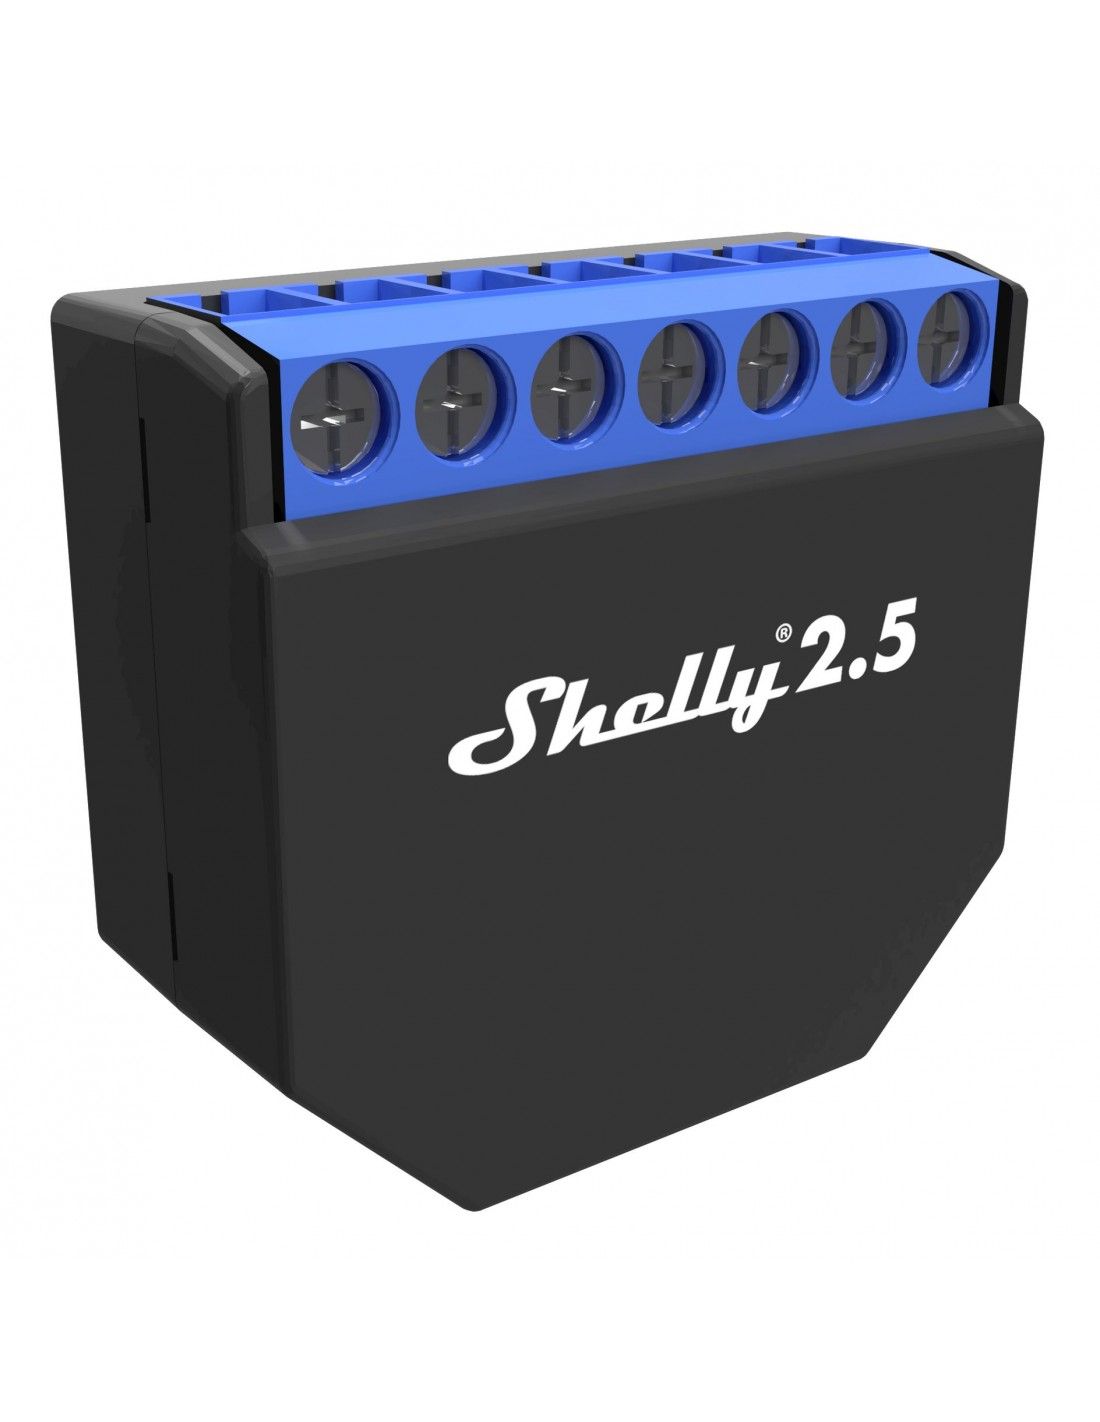 Shelly 2.5 UL: Compact Dual Relay WiFi Switch with Energy